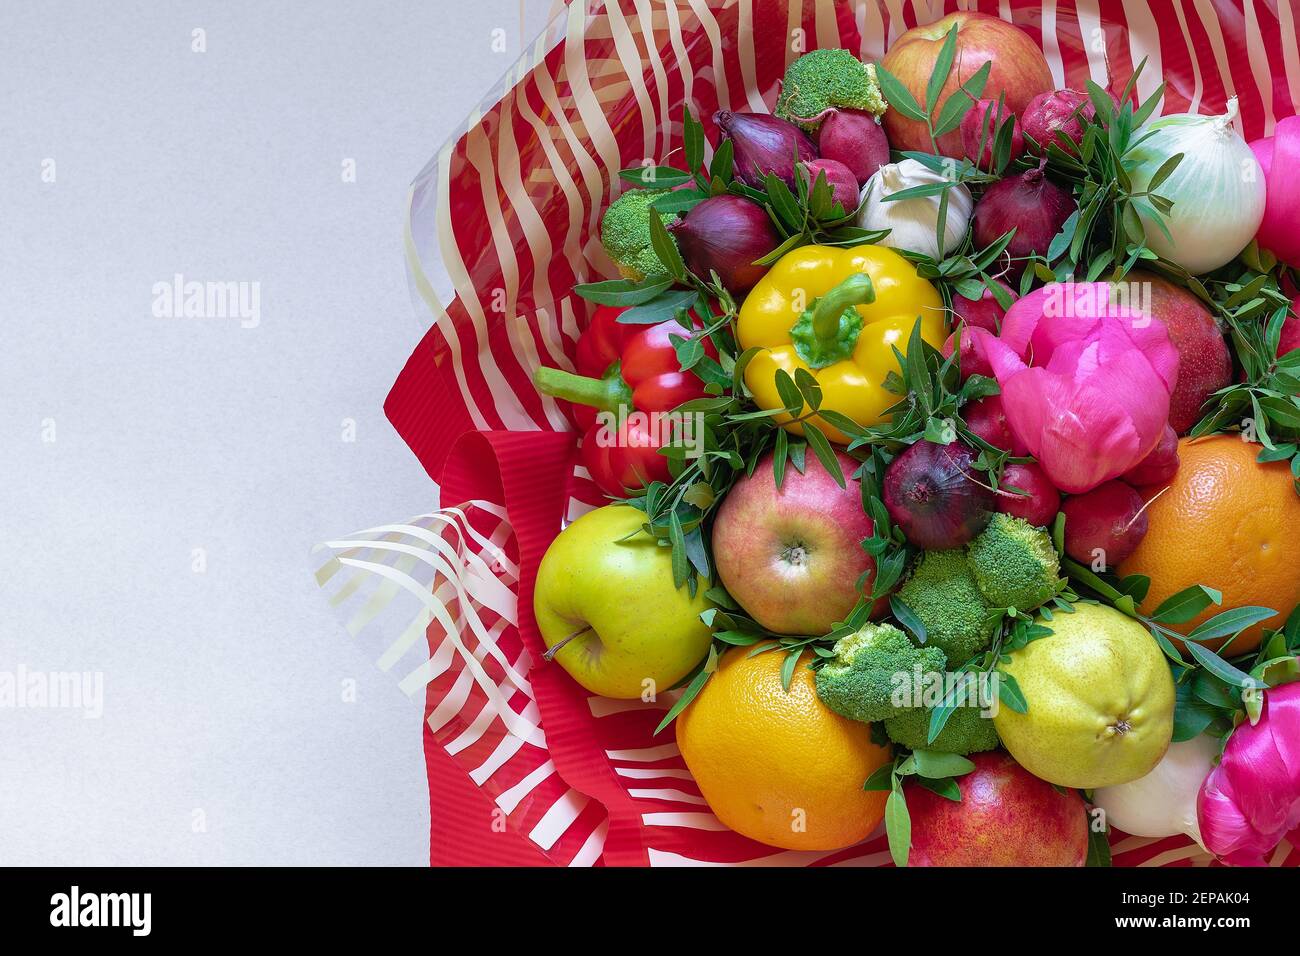 A stunning colorful bouquet of various fresh fruits, vegetables and flowers surrounded by red and transparent with white striped paper on a beige back Stock Photo